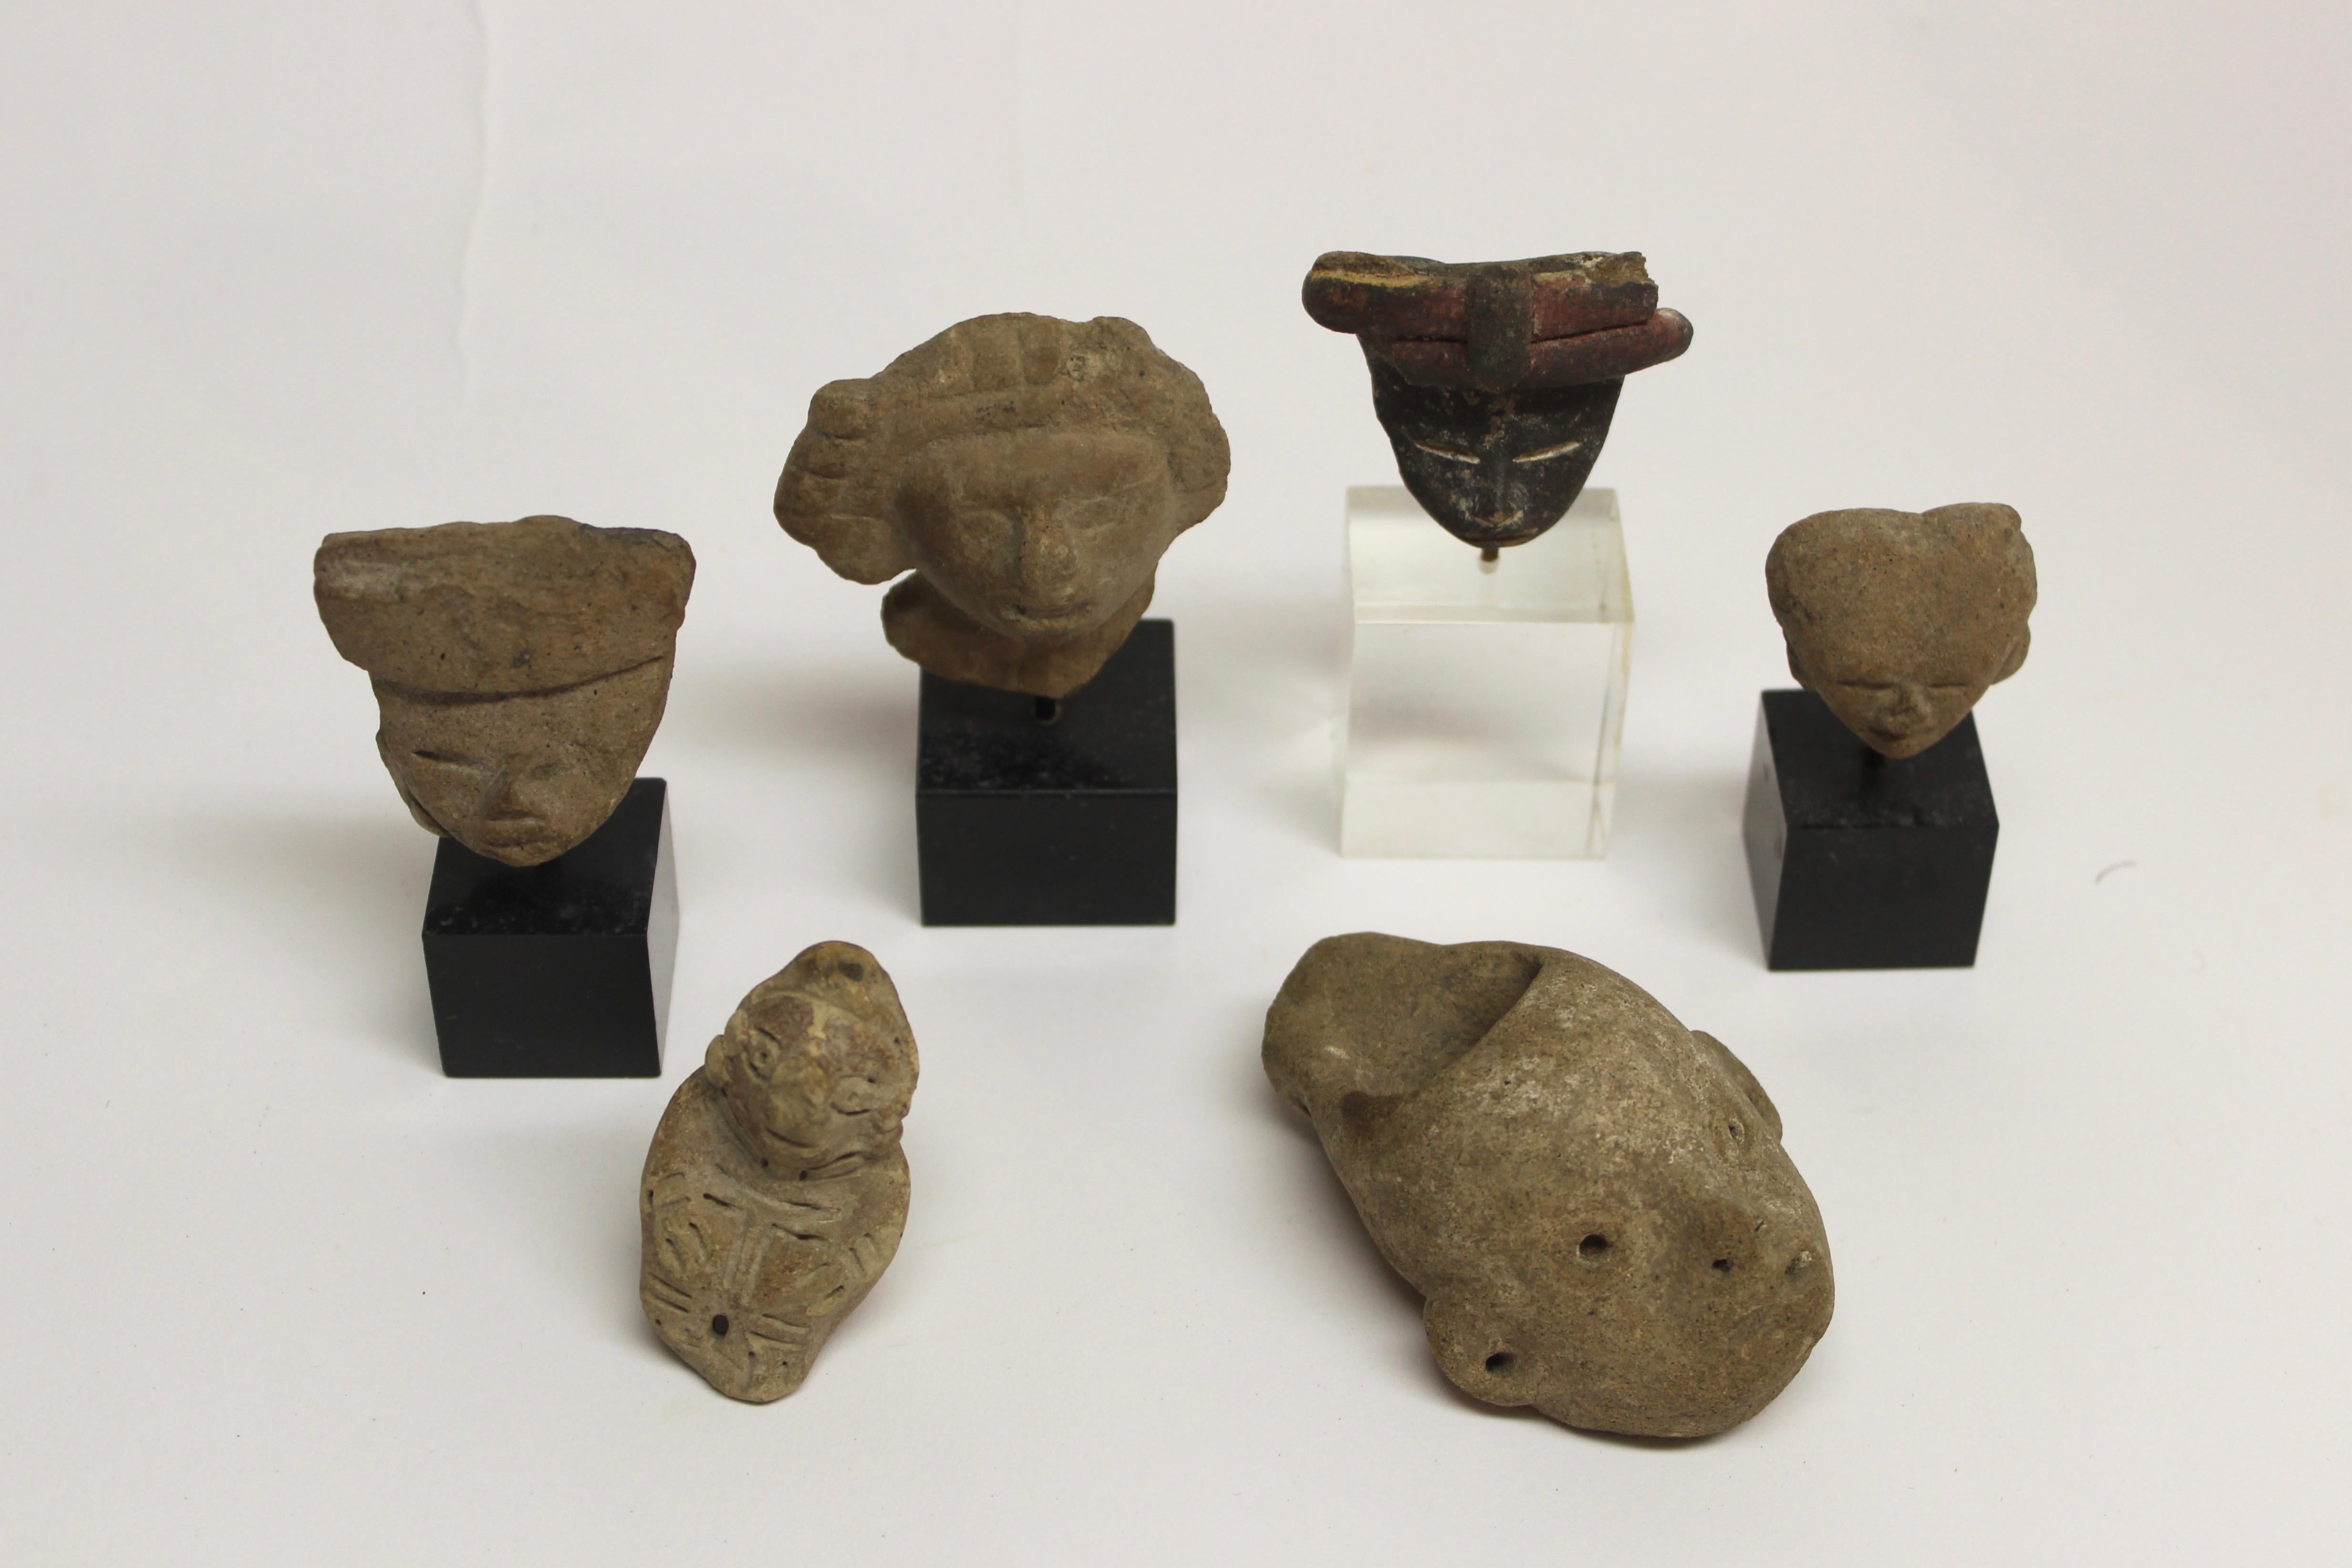 Collection of six Pre-Columbian pottery figures

They measure (as displayed from left):
#1. 2.25